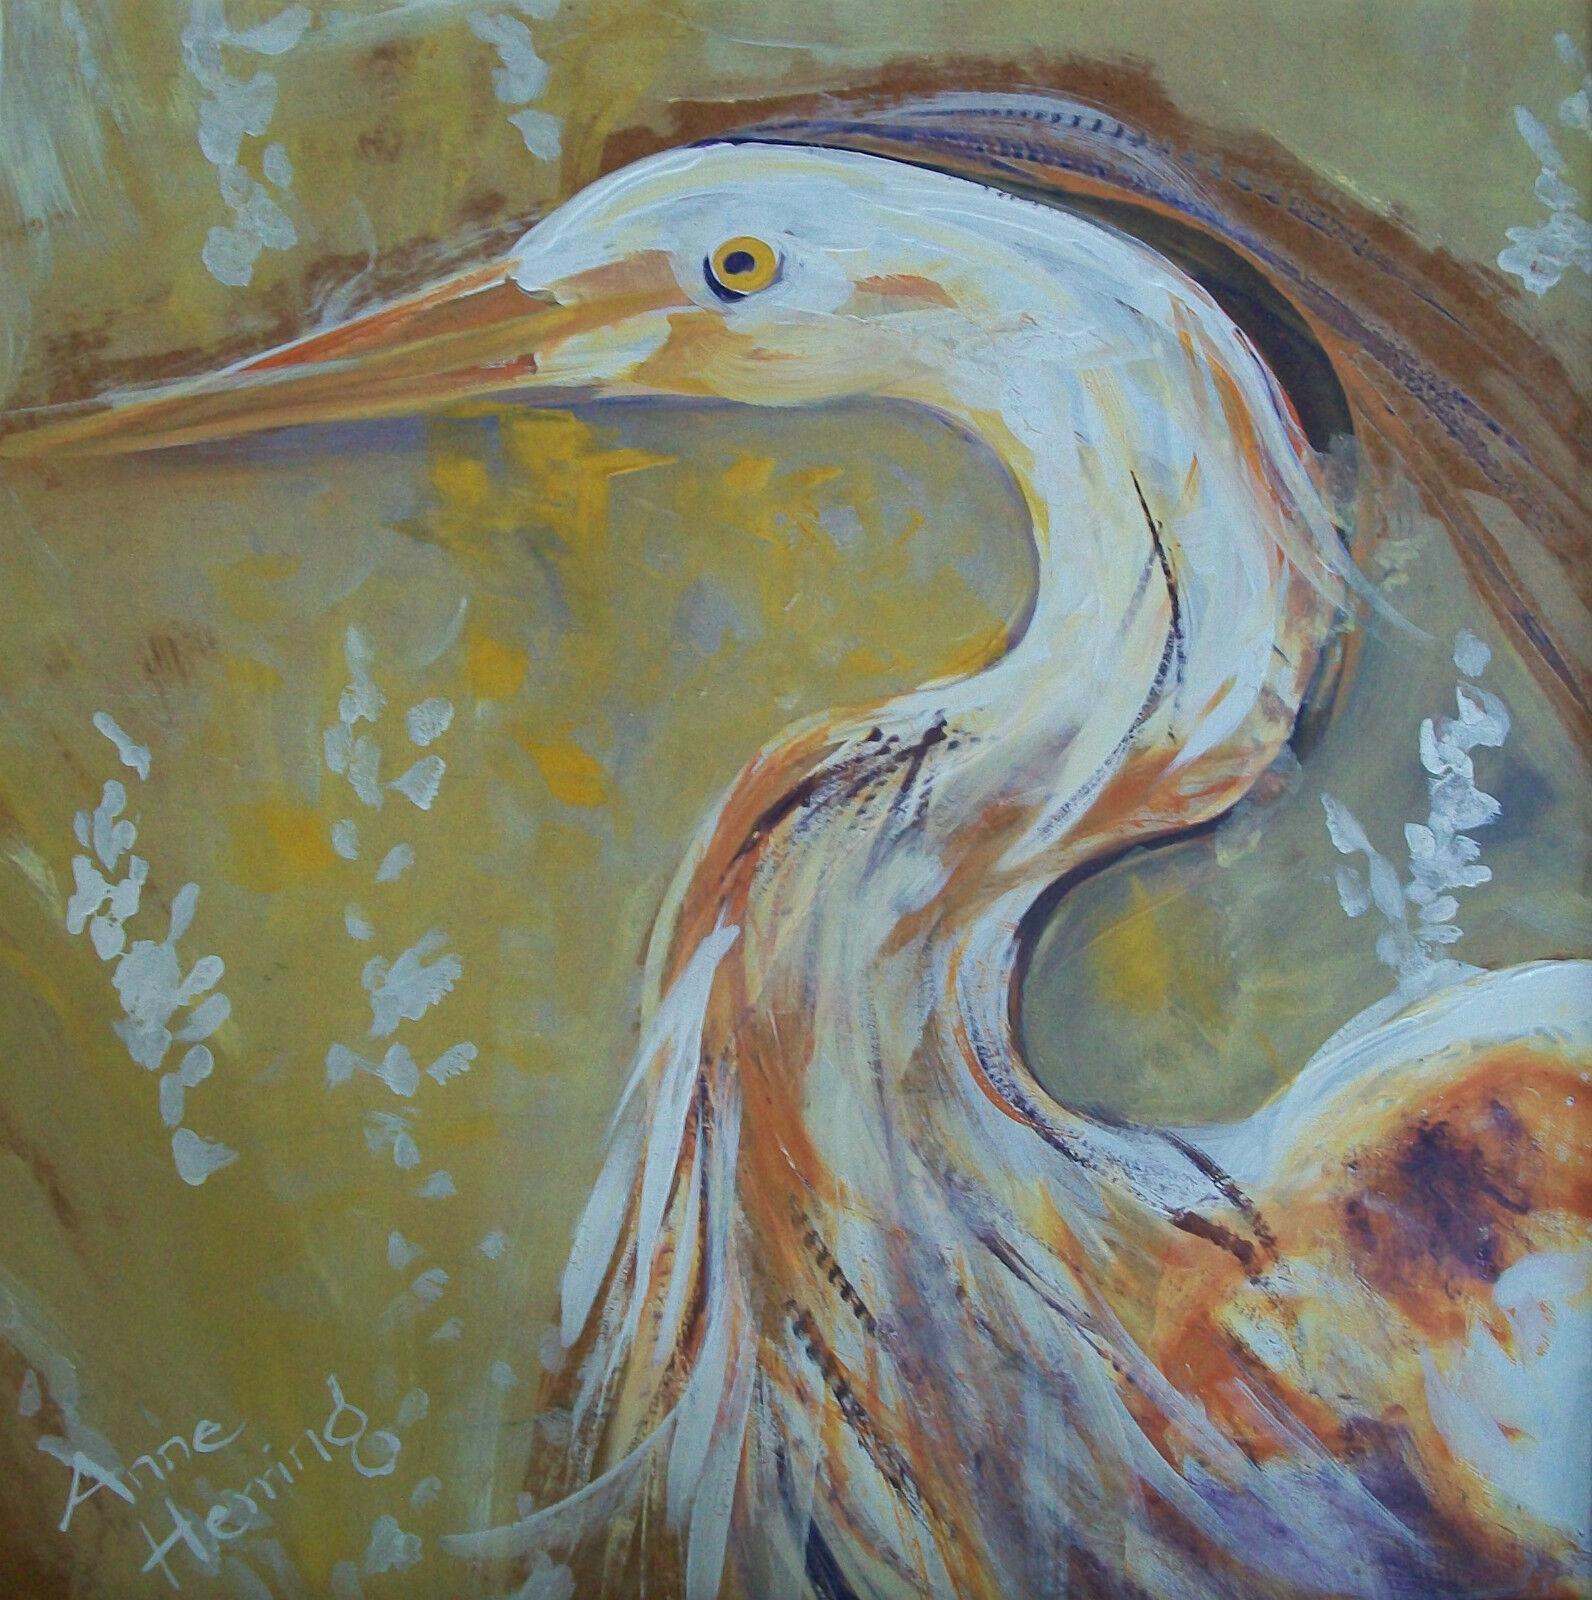 ANNE HERRING - 'Full Plumage - Heron' - Vintage modernist style acrylic painting on Masonite panel - signed lower left - signed and titled verso - original frame - United States - circa 1980's. 

Excellent vintage condition - no loss - no damage -